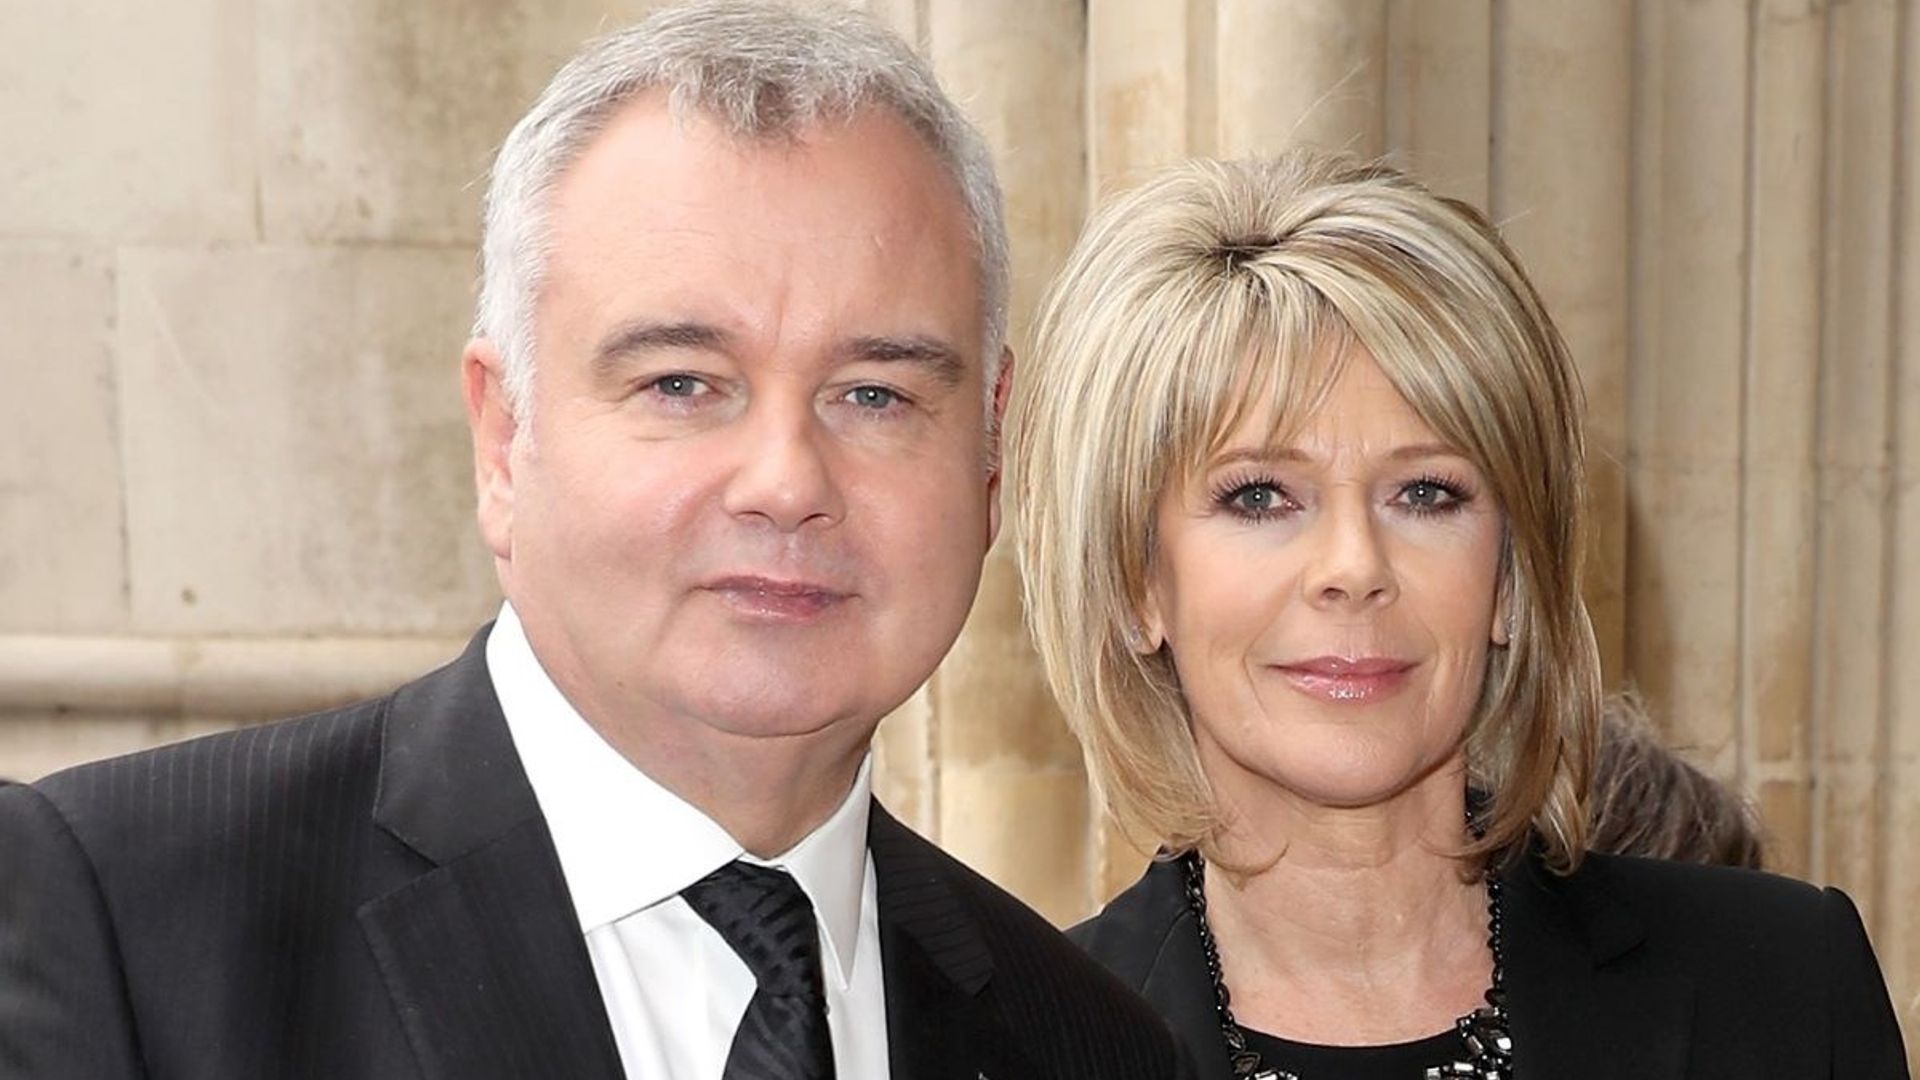 Eamonn Holmes sparks debate as he reveals wife Ruth Langsford's hilarious ultimatum